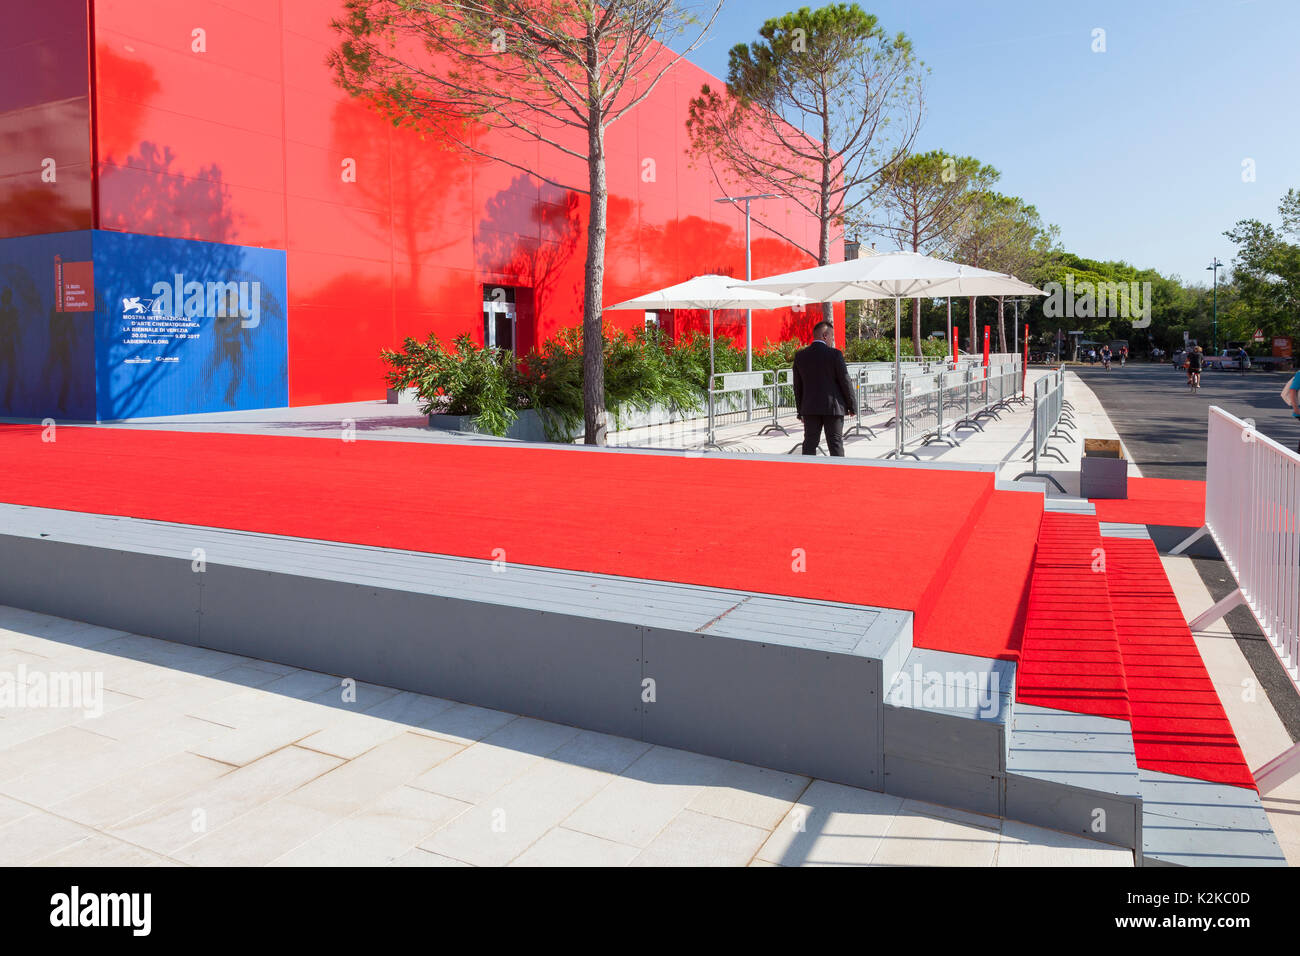 Lido, Venice, Italy. 30th Aug, 2017. Venues for the 2017 Film Festival after last minute preparations and installations and before the crowds arrive for the opening of the festival. The final layout of the red carpet steps and entrance to the Sala Giardino with a security guard facing away over the barriers to direct the flow of people. Stock Photo